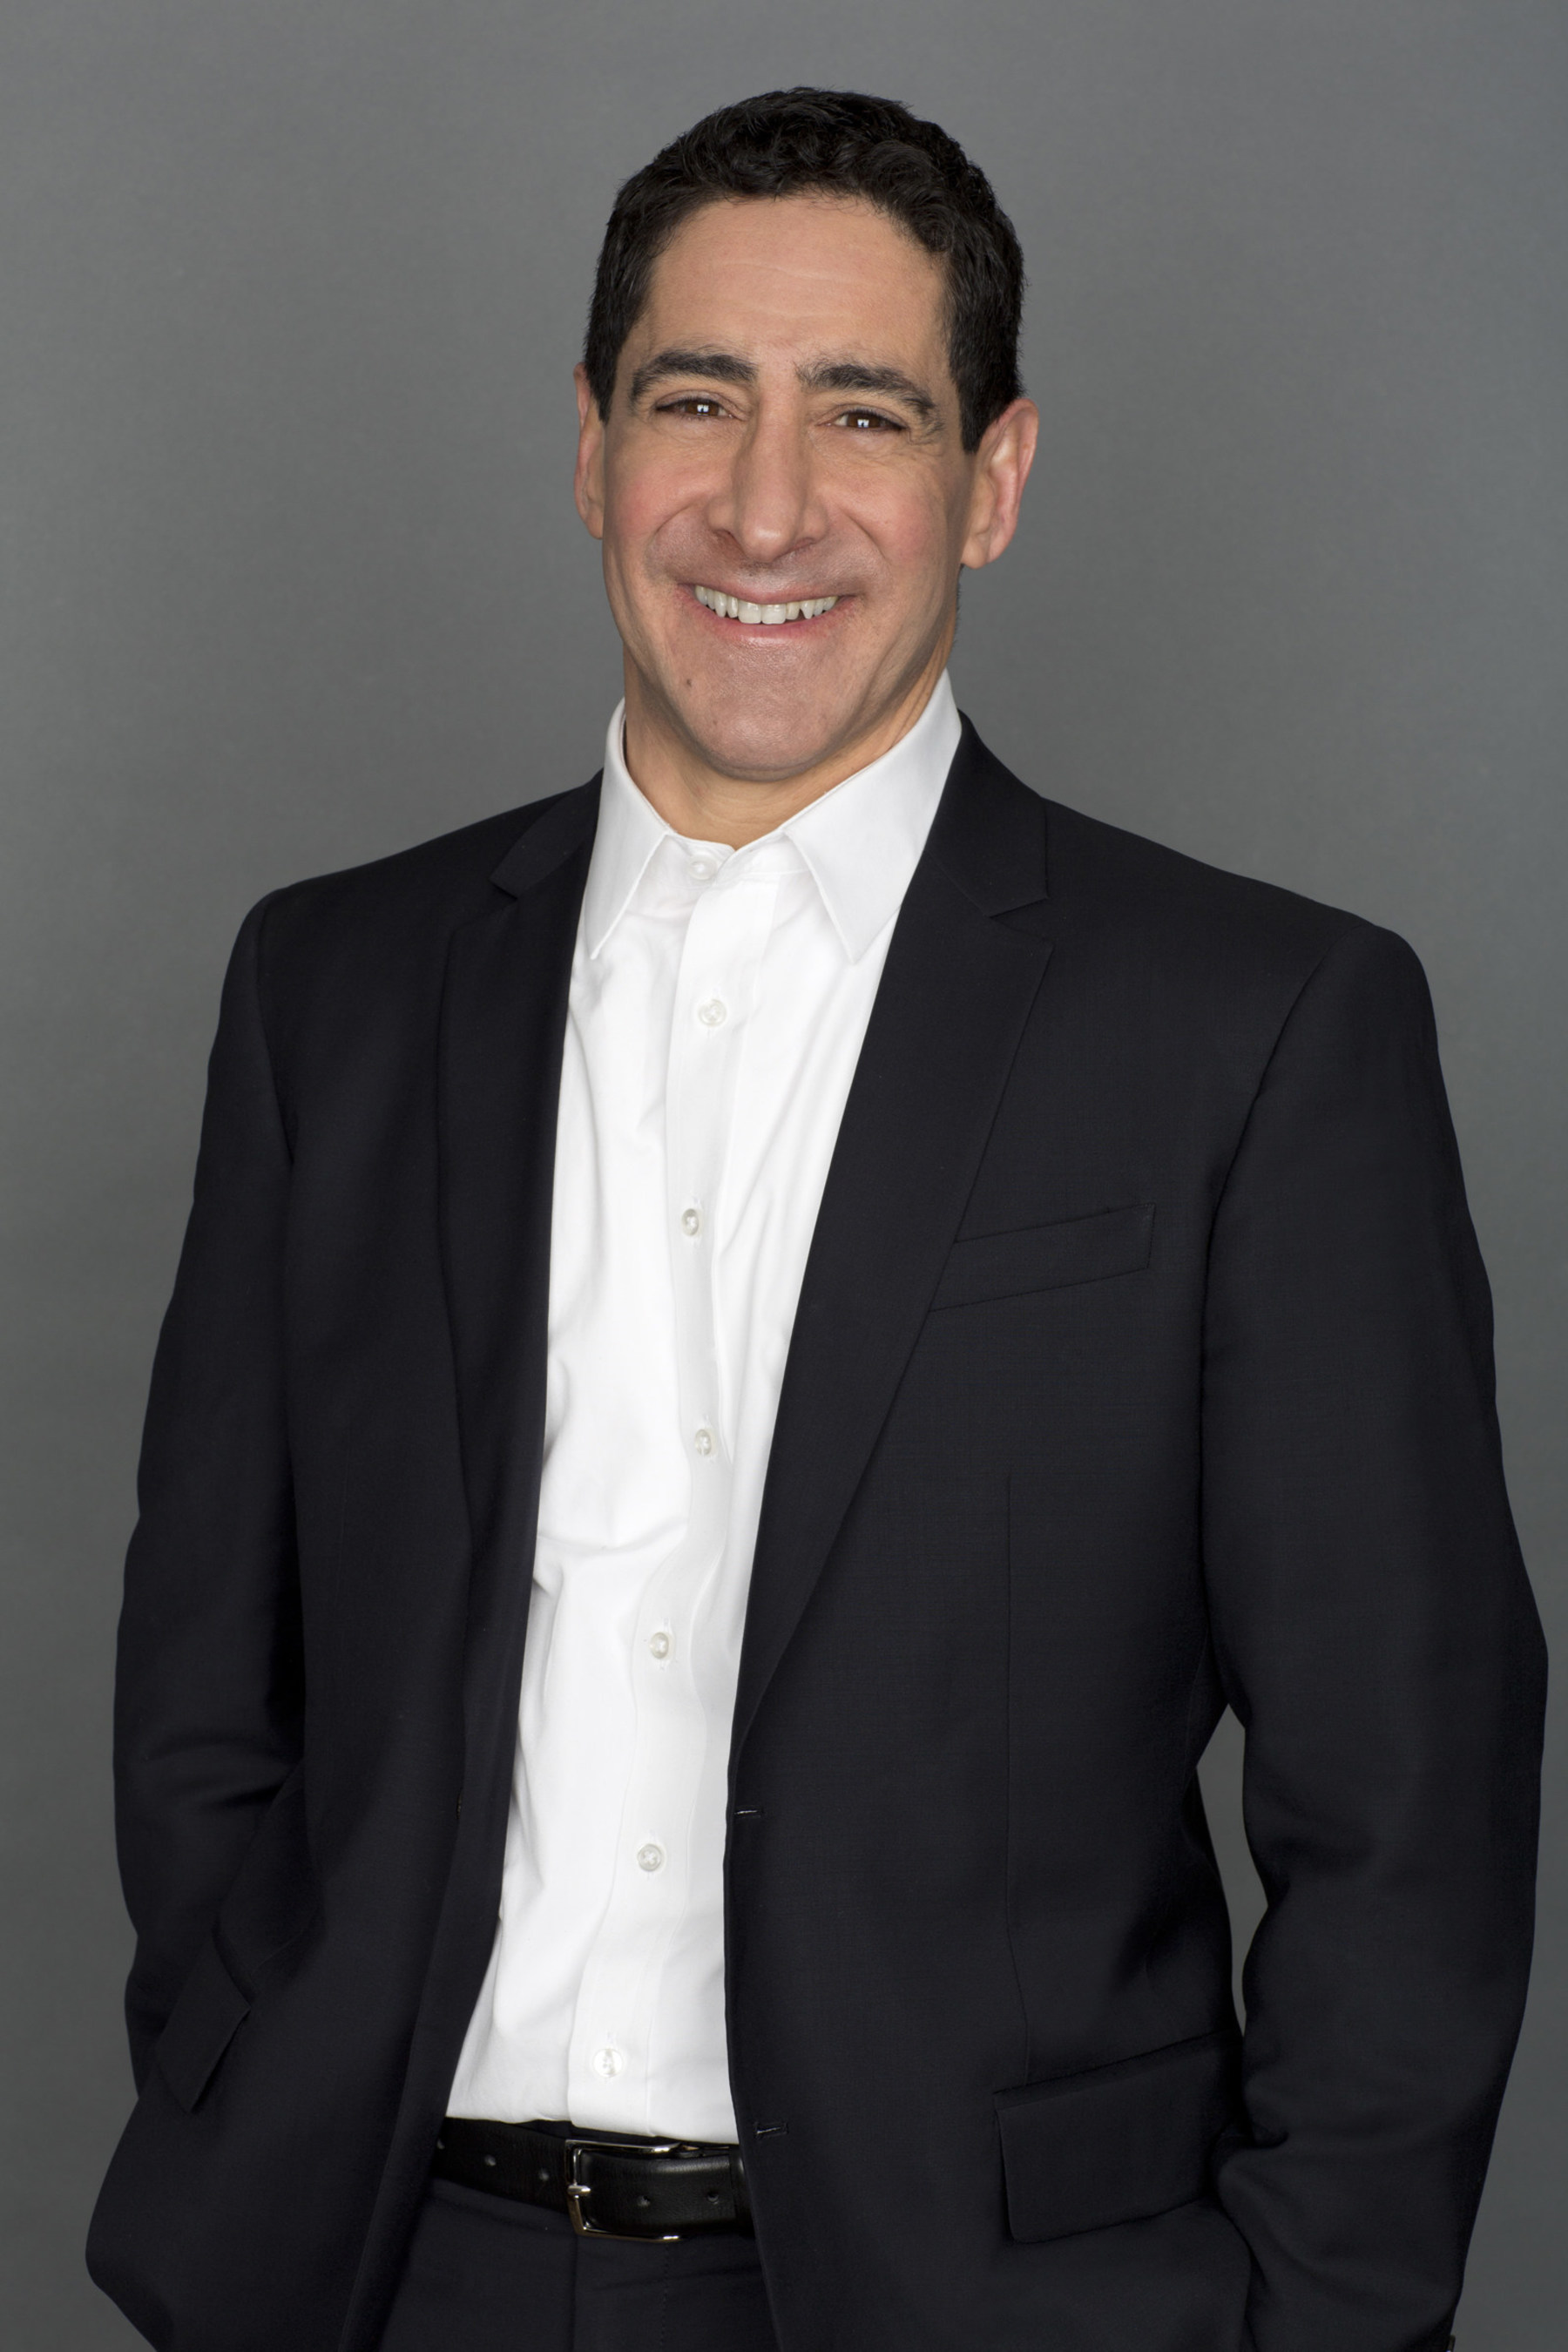 World Esports Associate taps Ken Hershman to serve as Executive Chairman and Commissioner. Hershman spent nearly 30 years in the television sports world, where he helped spearhead some of the industry's most innovative television programming for both Home Box Office (HBO) and Showtime.